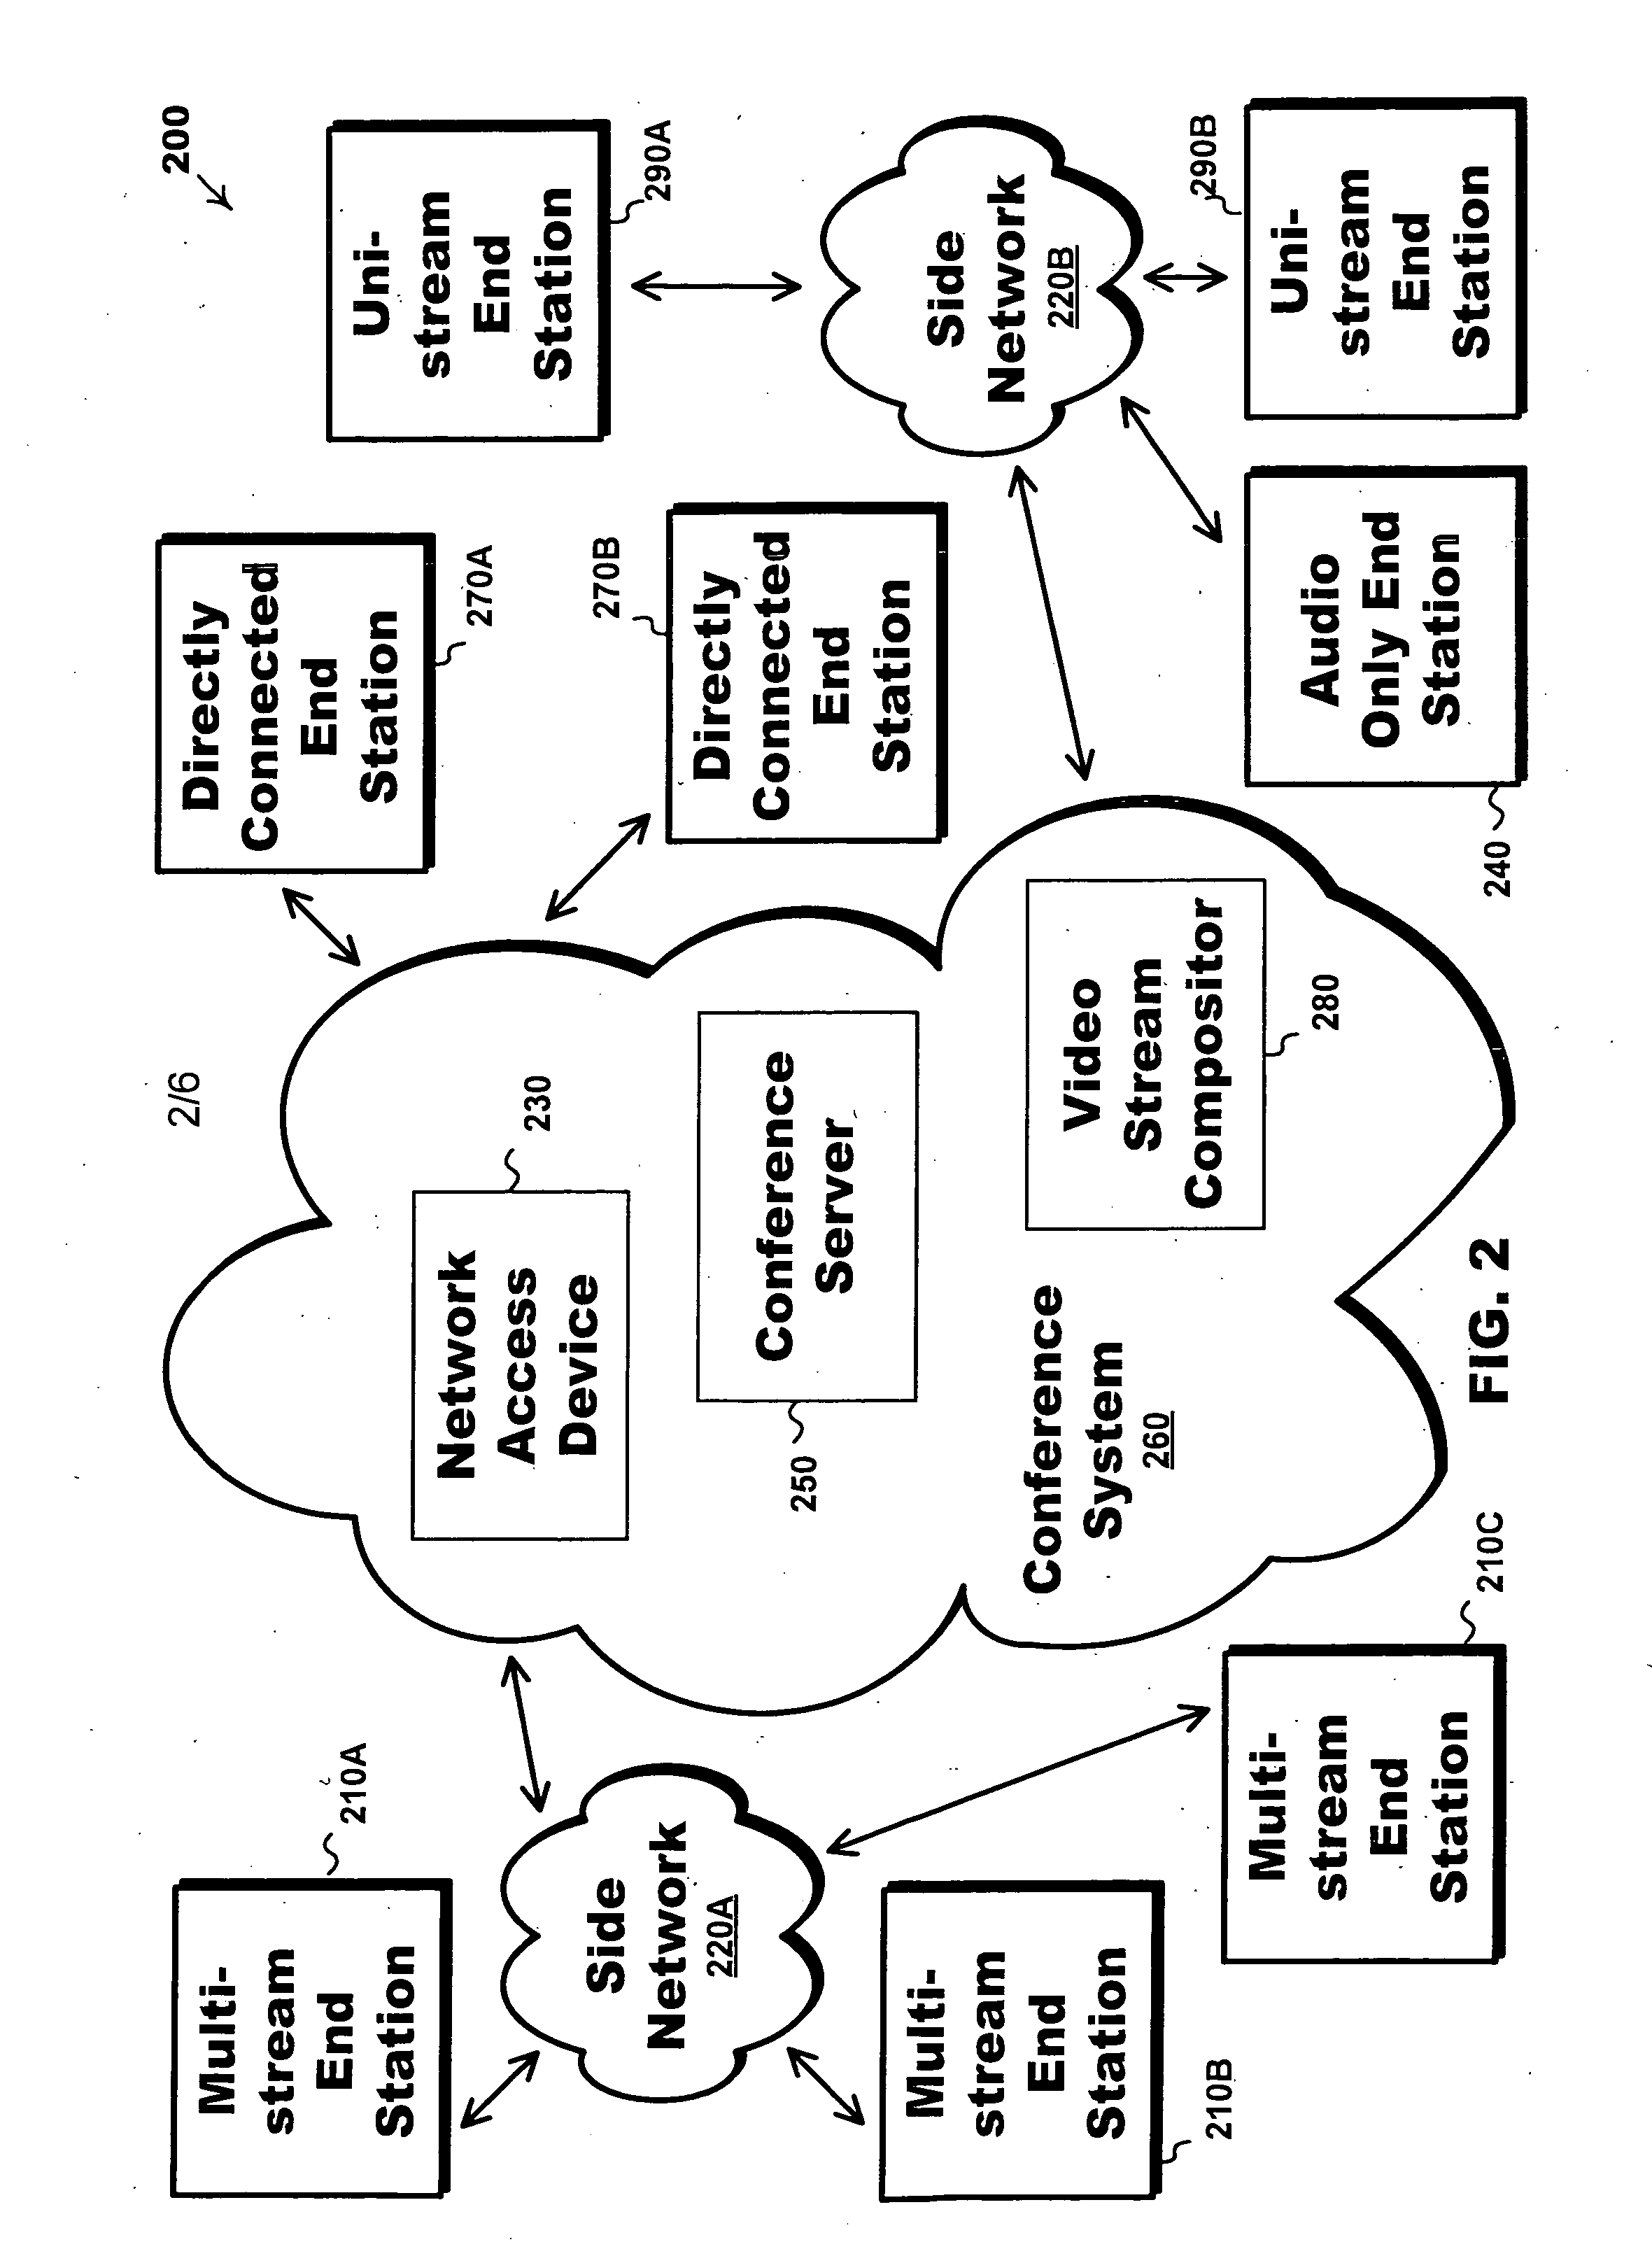 Dynamically switched and static multiple video streams for a multimedia conference